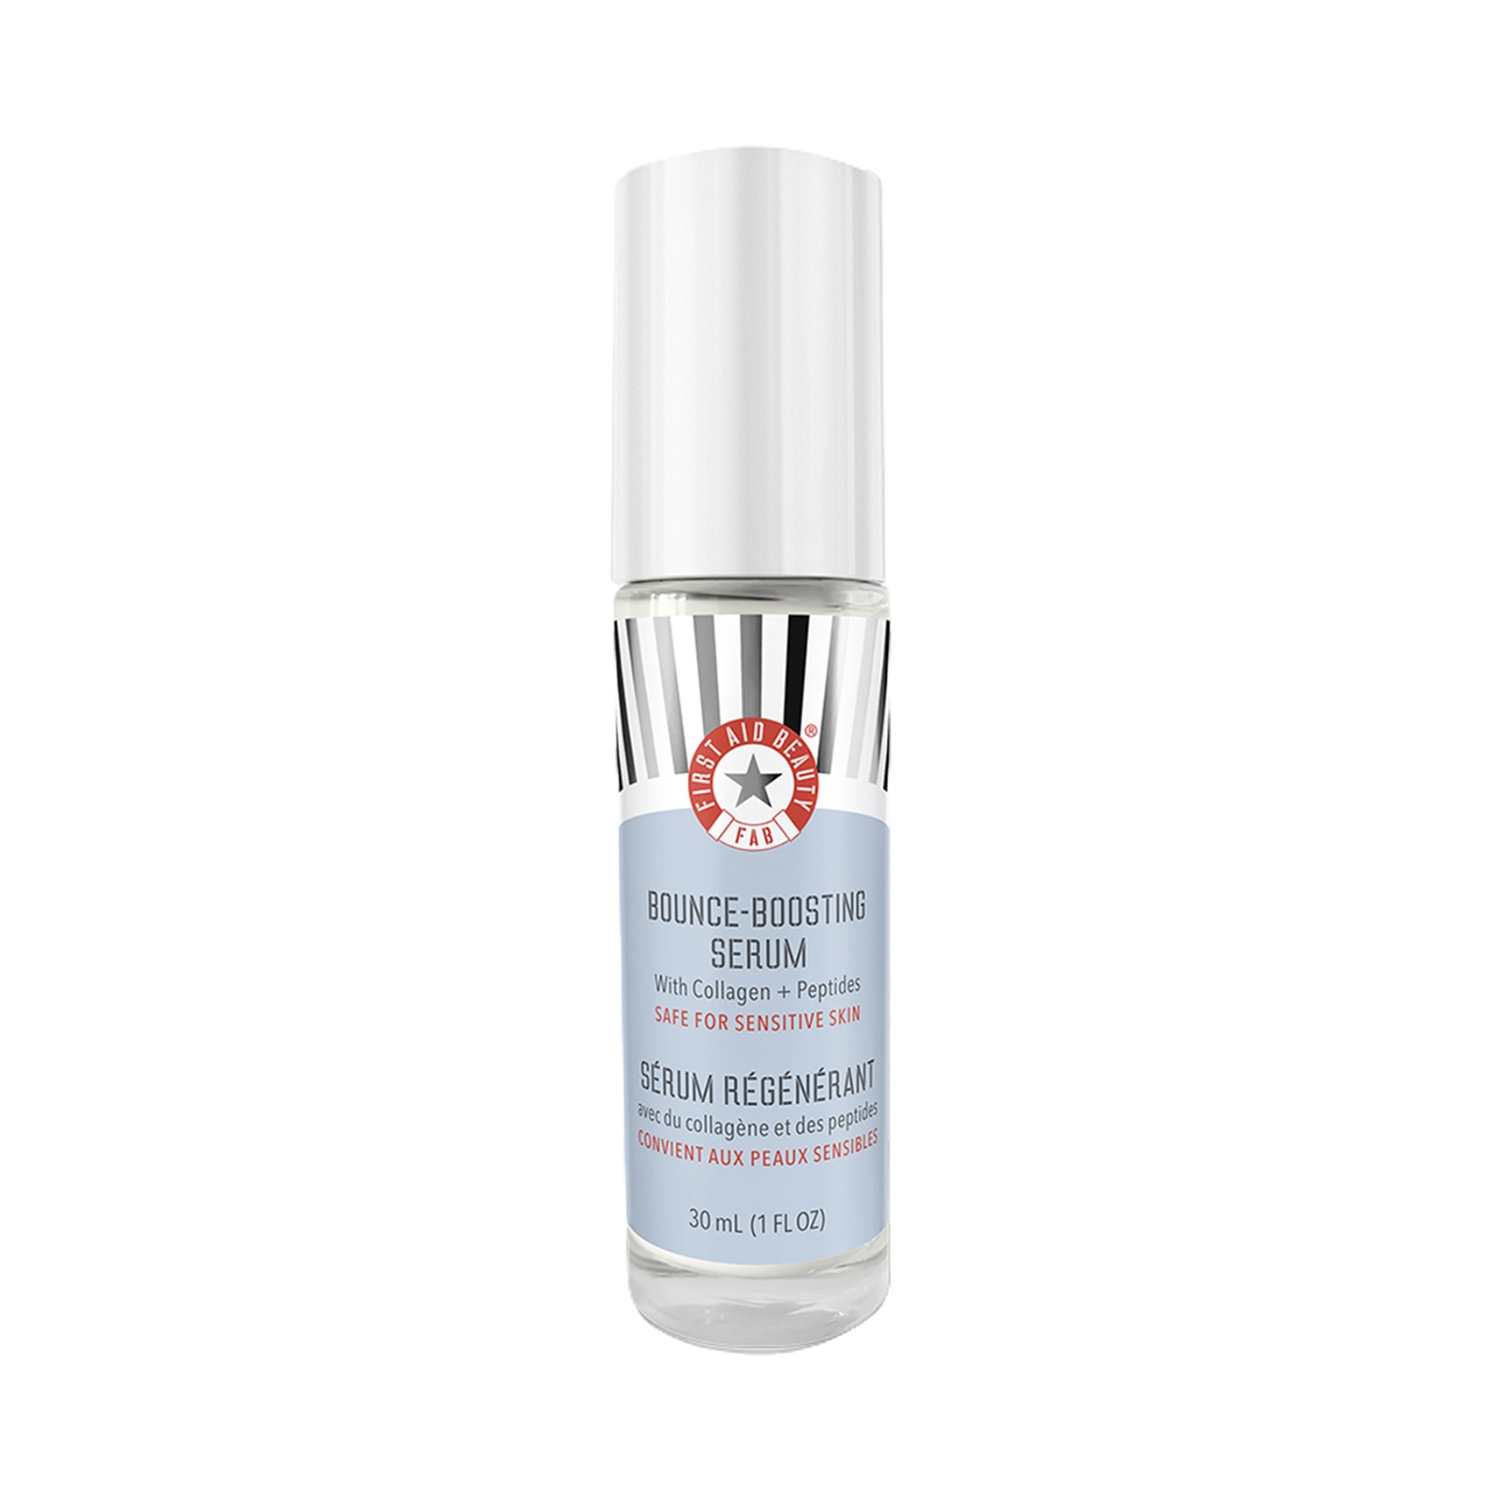 First Aid Beauty | First Aid Beauty Bounce Boosting Serum With Collagen + Peptide (30ml)